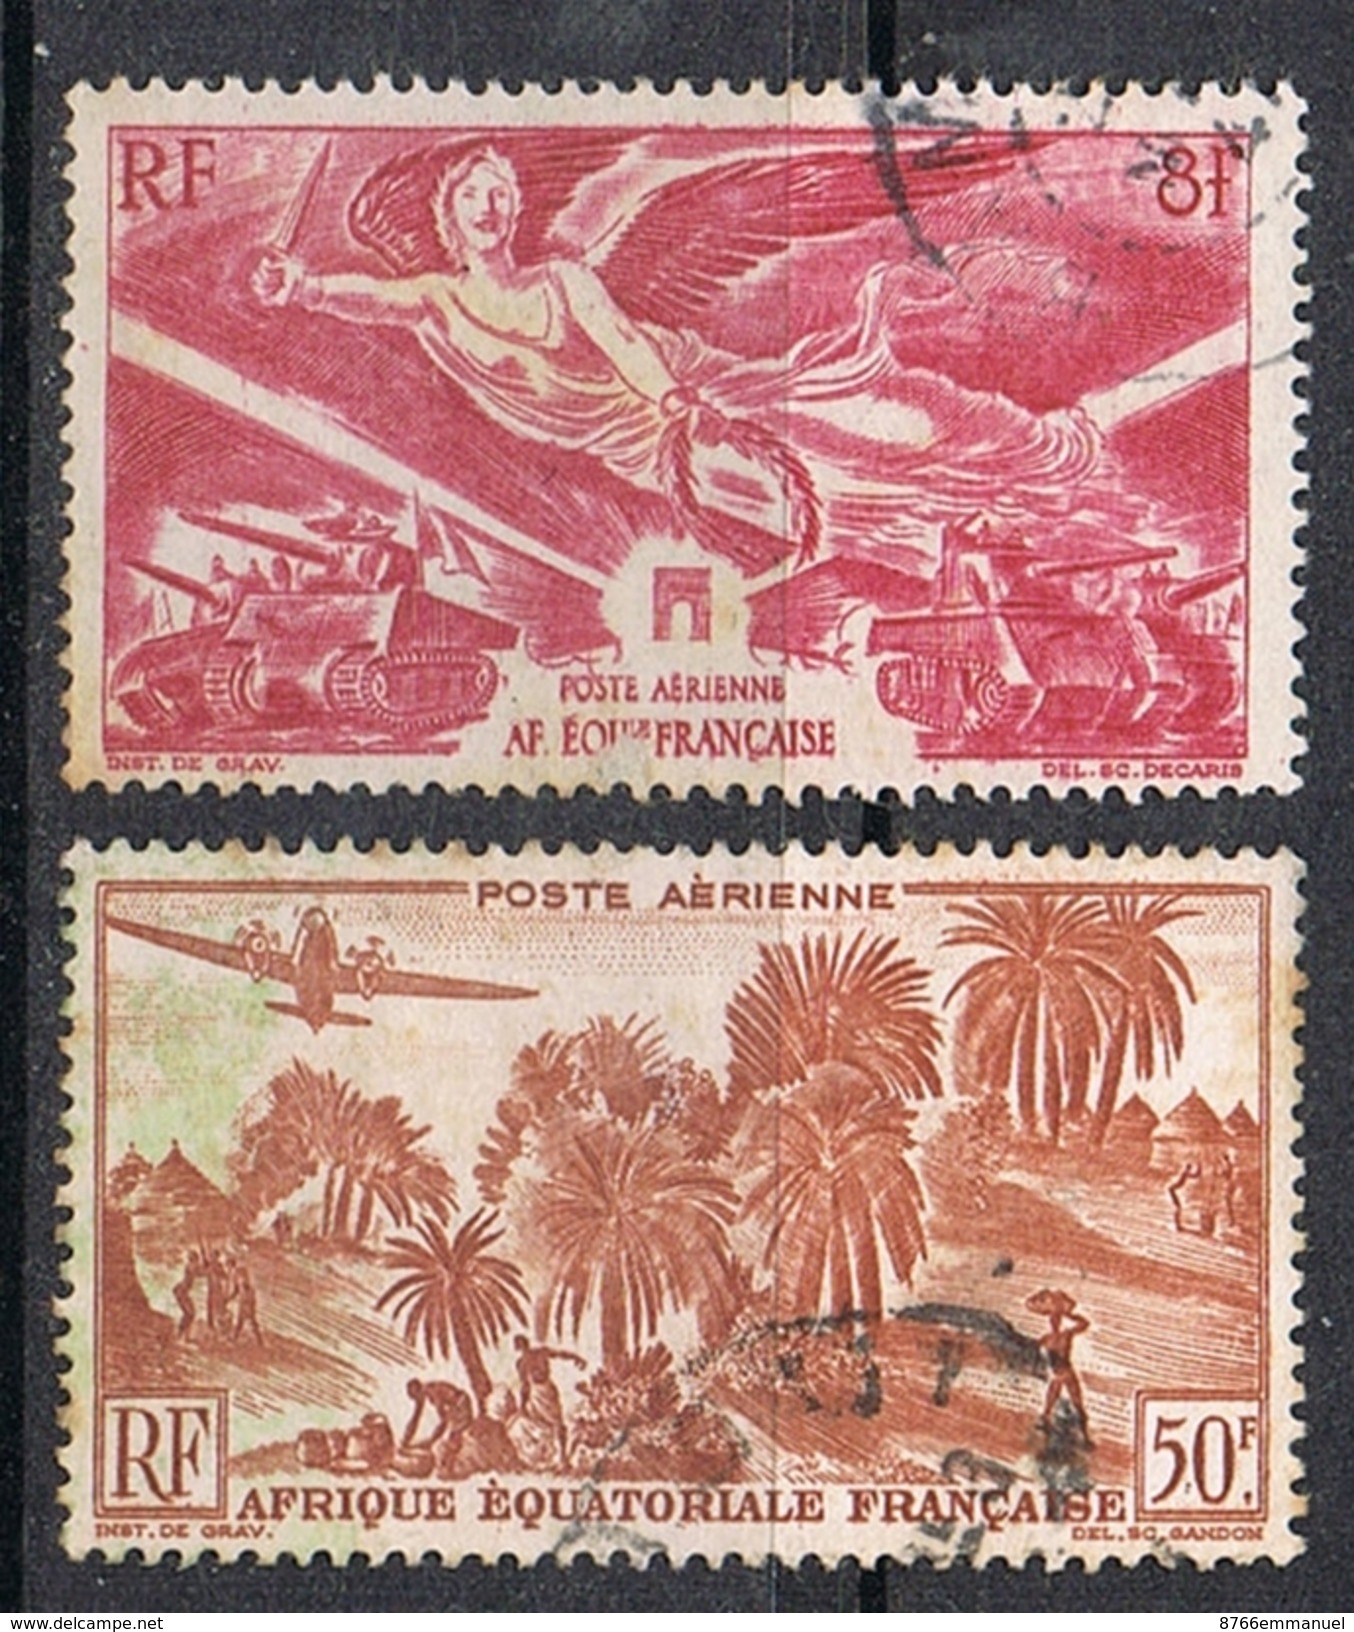 A.E.F. AERIEN N°43 ET 50 - Used Stamps